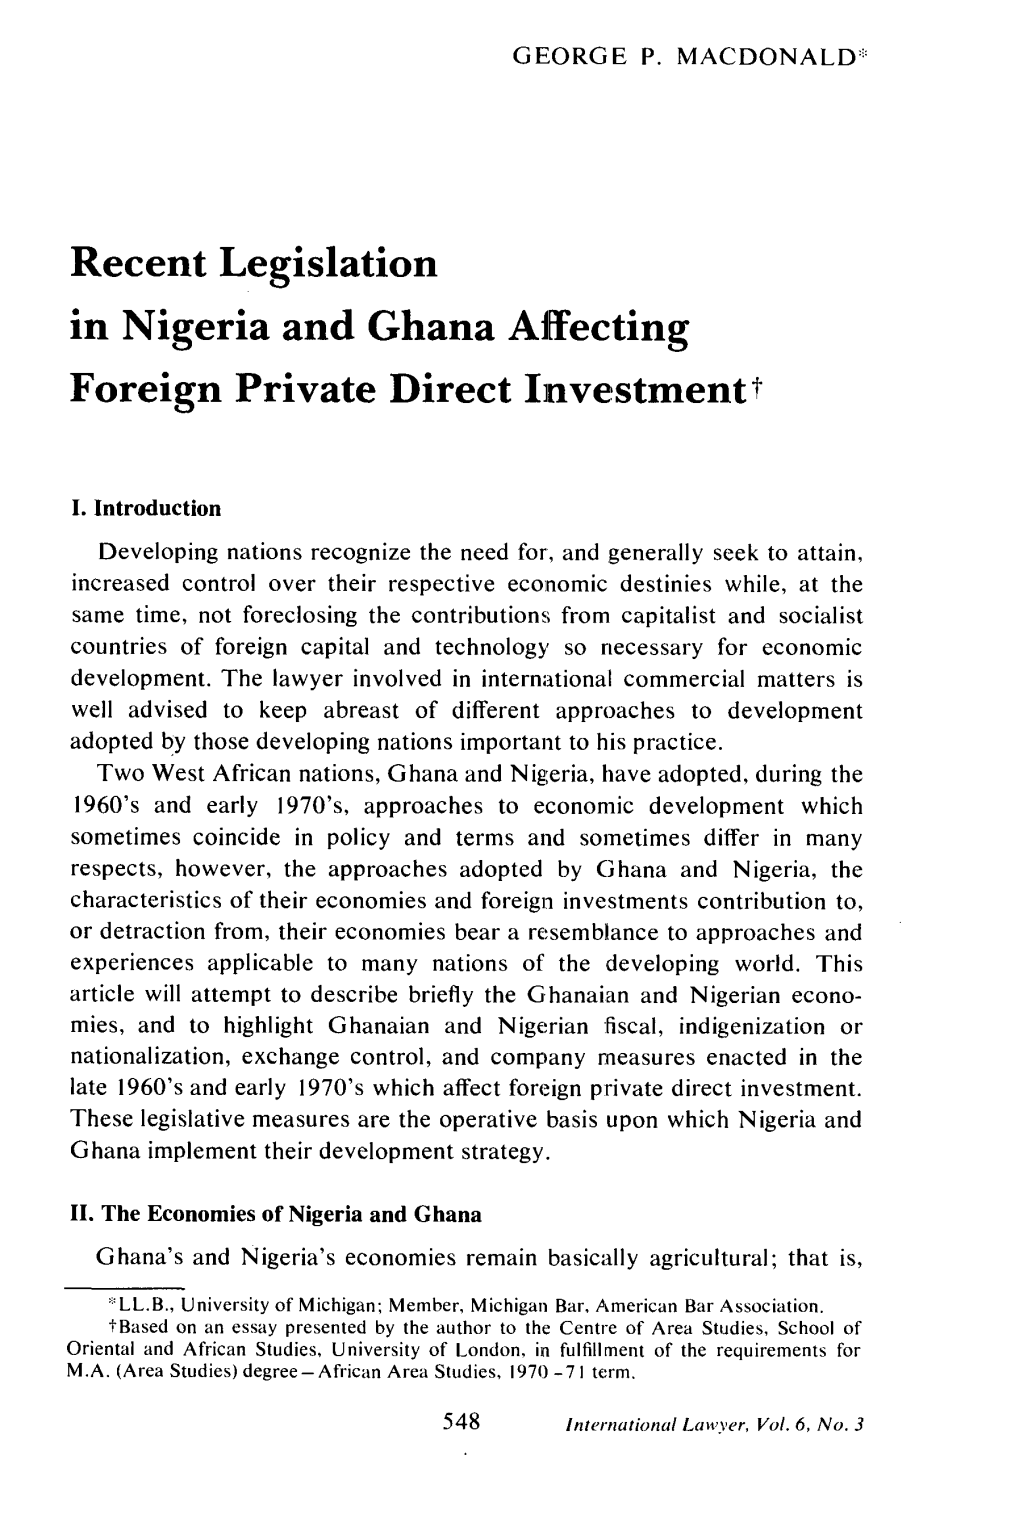 Recent Legislation in Nigeria and Ghana Affecting Foreign Private Direct Investmentt